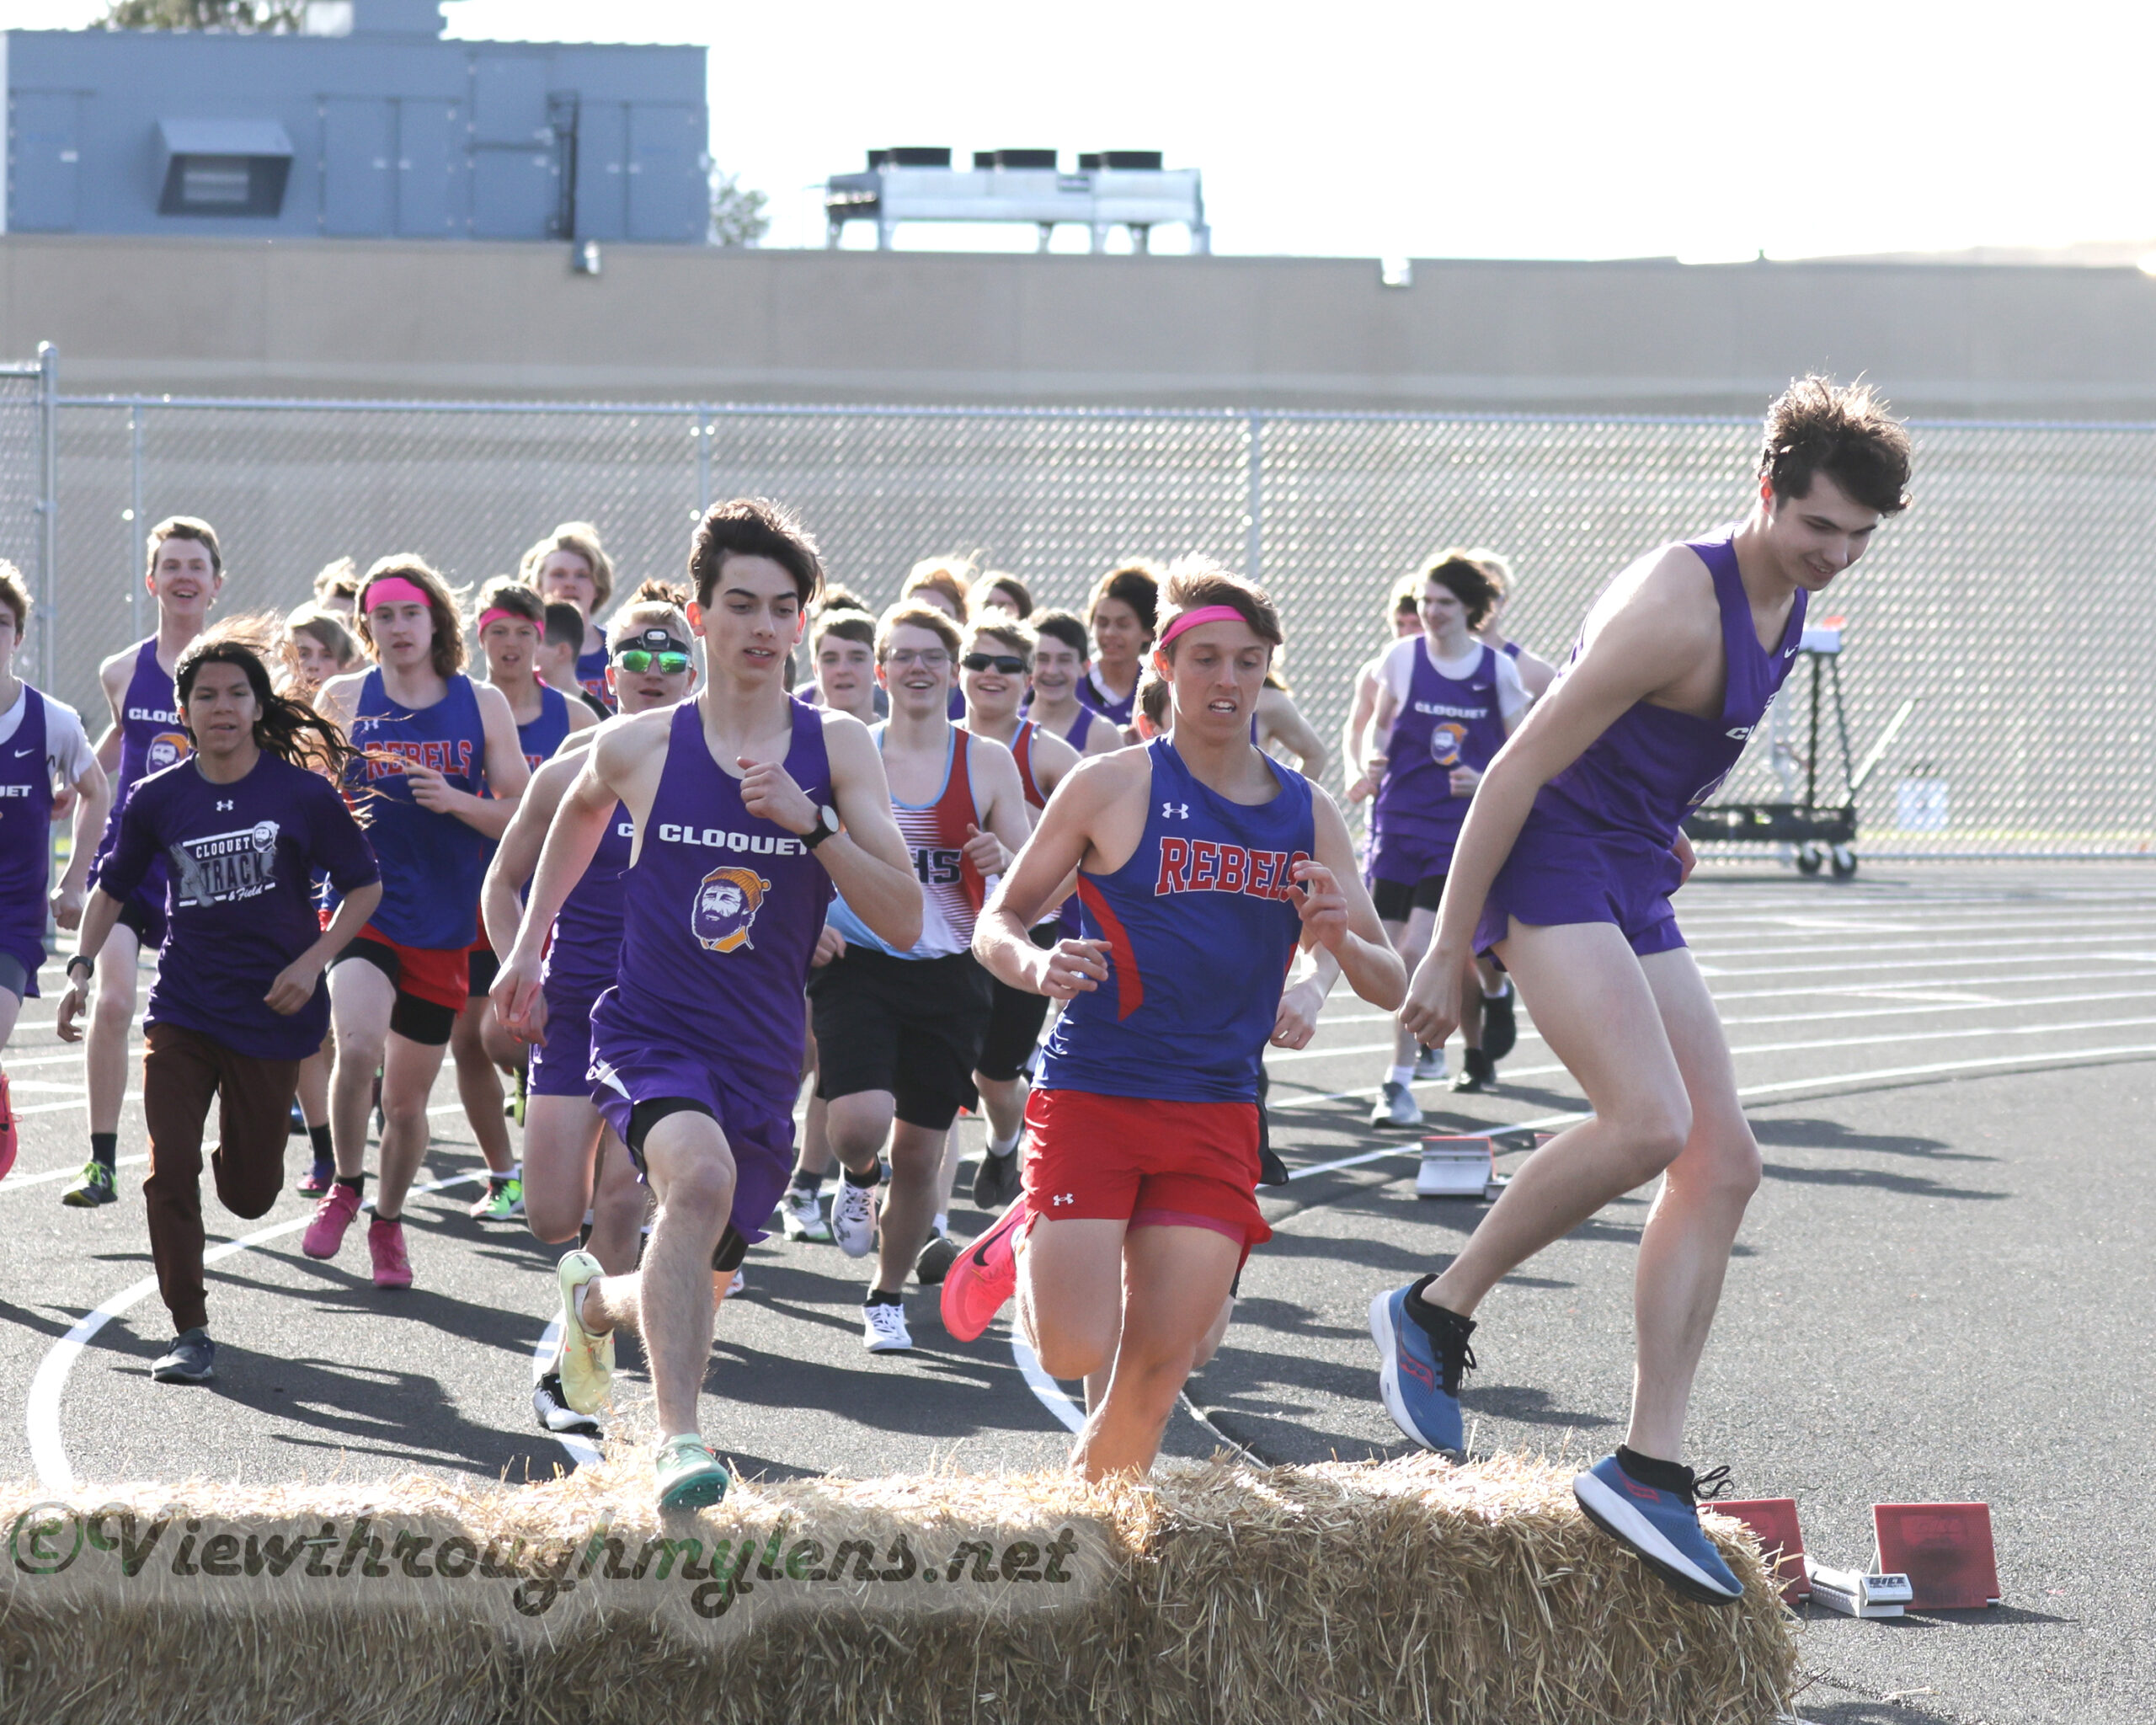 The Cloquet Relays feature a steeplechase race, with straw bales used in place of not having water pits at the Cloquet track.